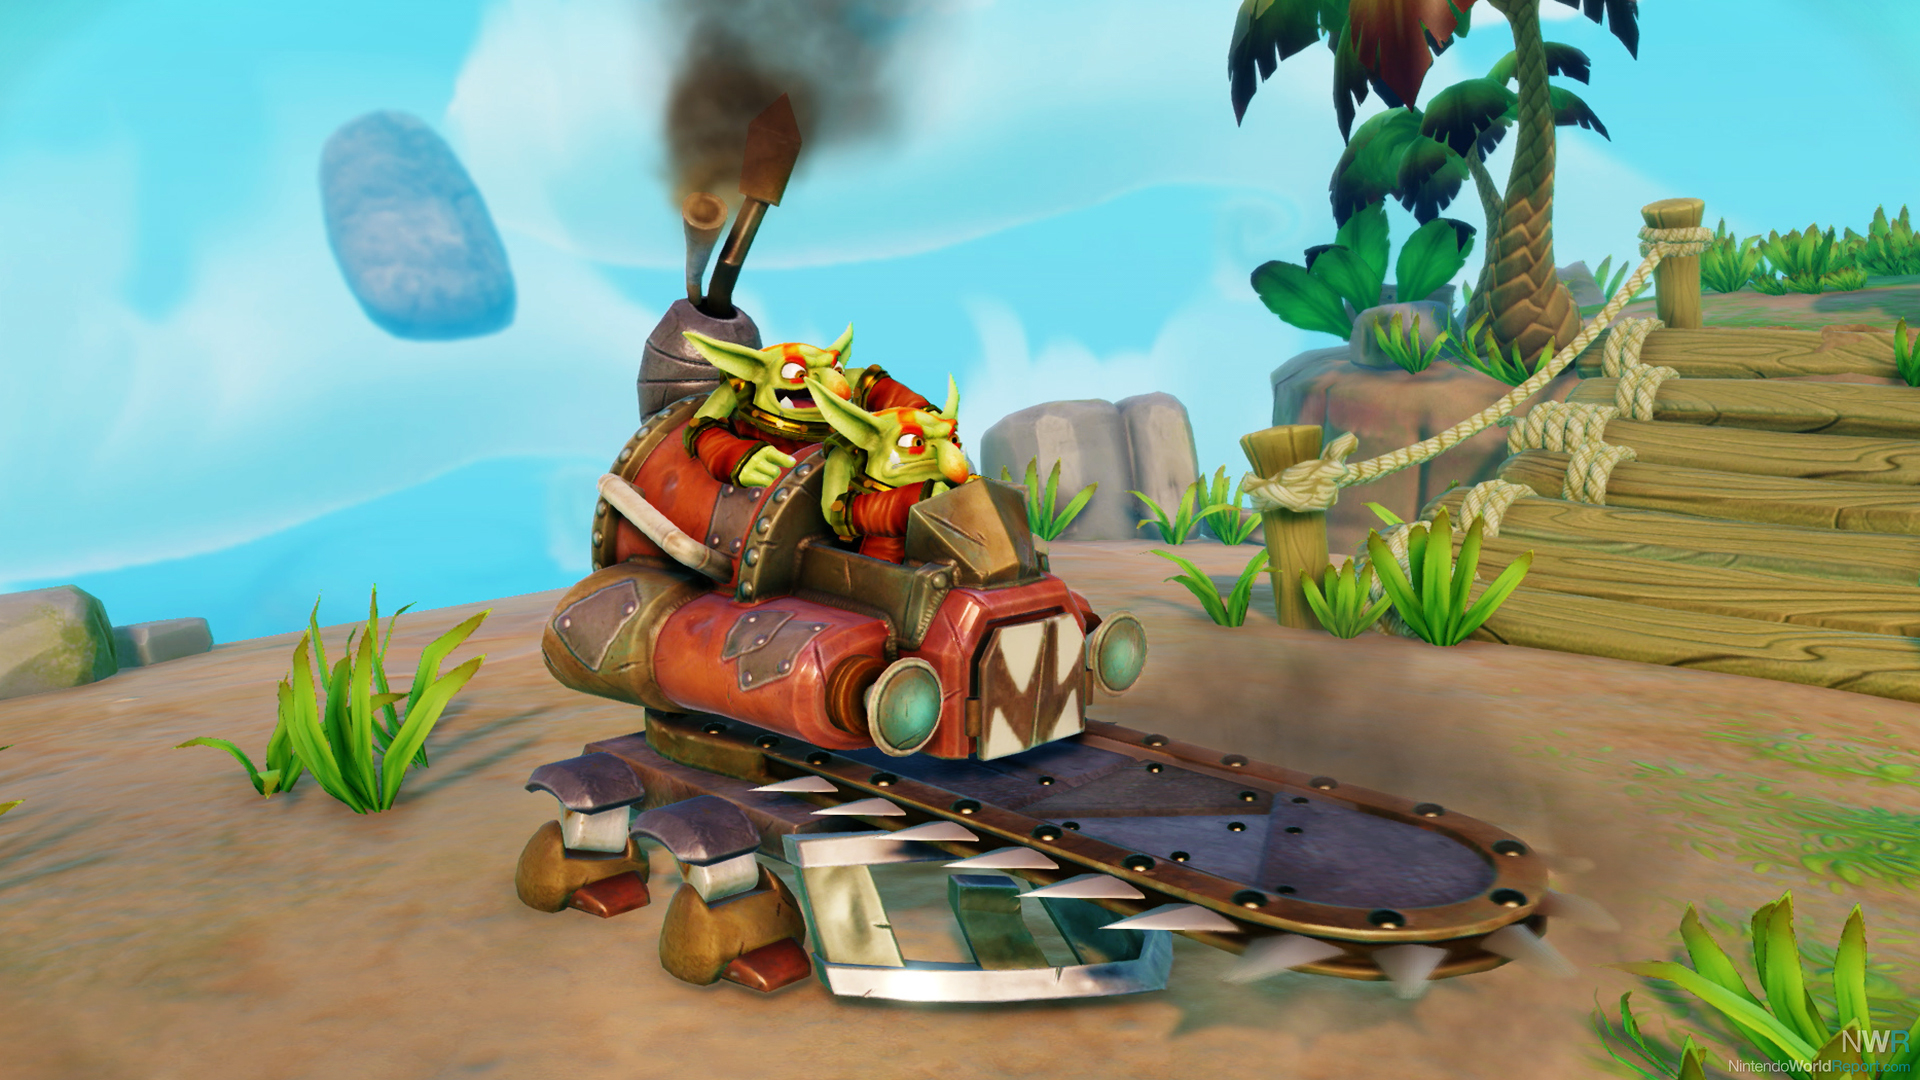 1920x1080 Skylanders Trap Team Hands-on Preview Hands-on Preview Nintendo World Report